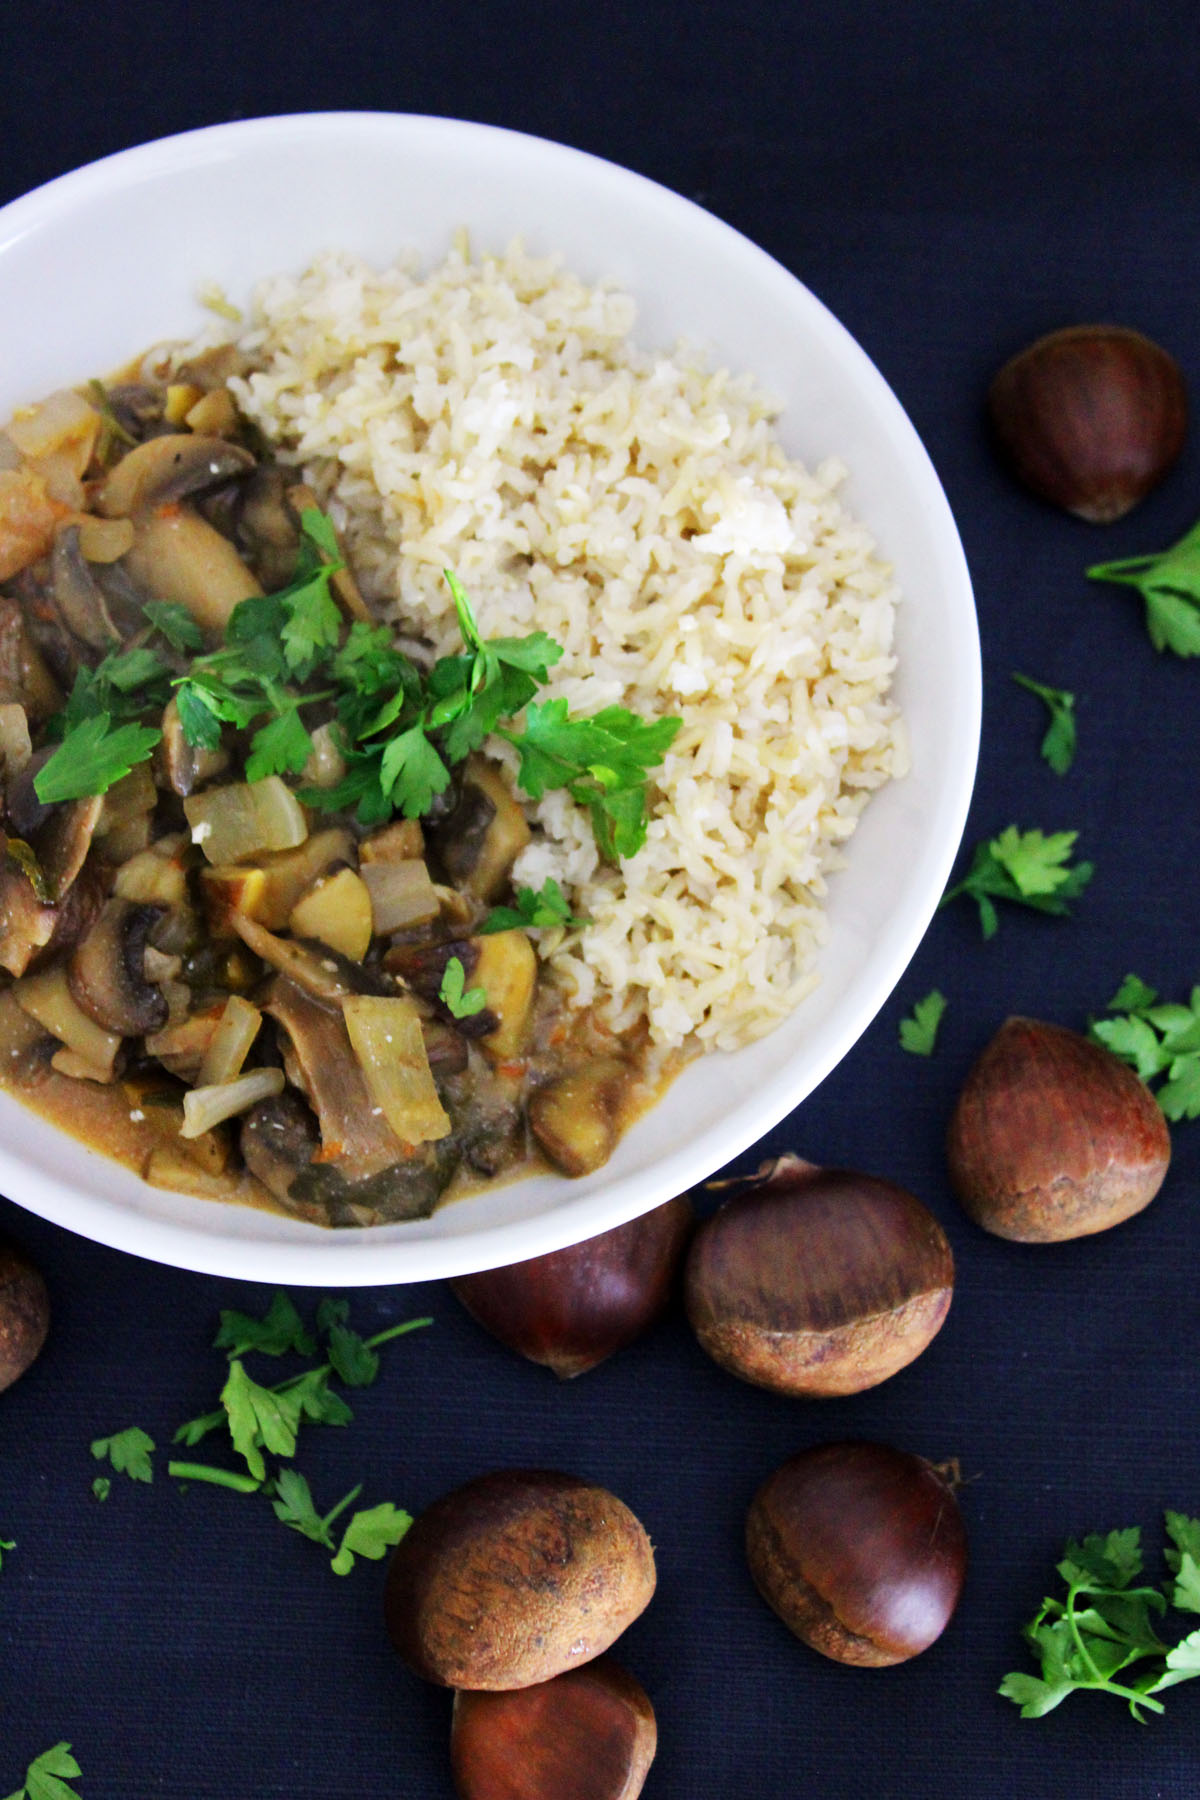 Chestnut Stroganoff with steamed rice and fresh parsley